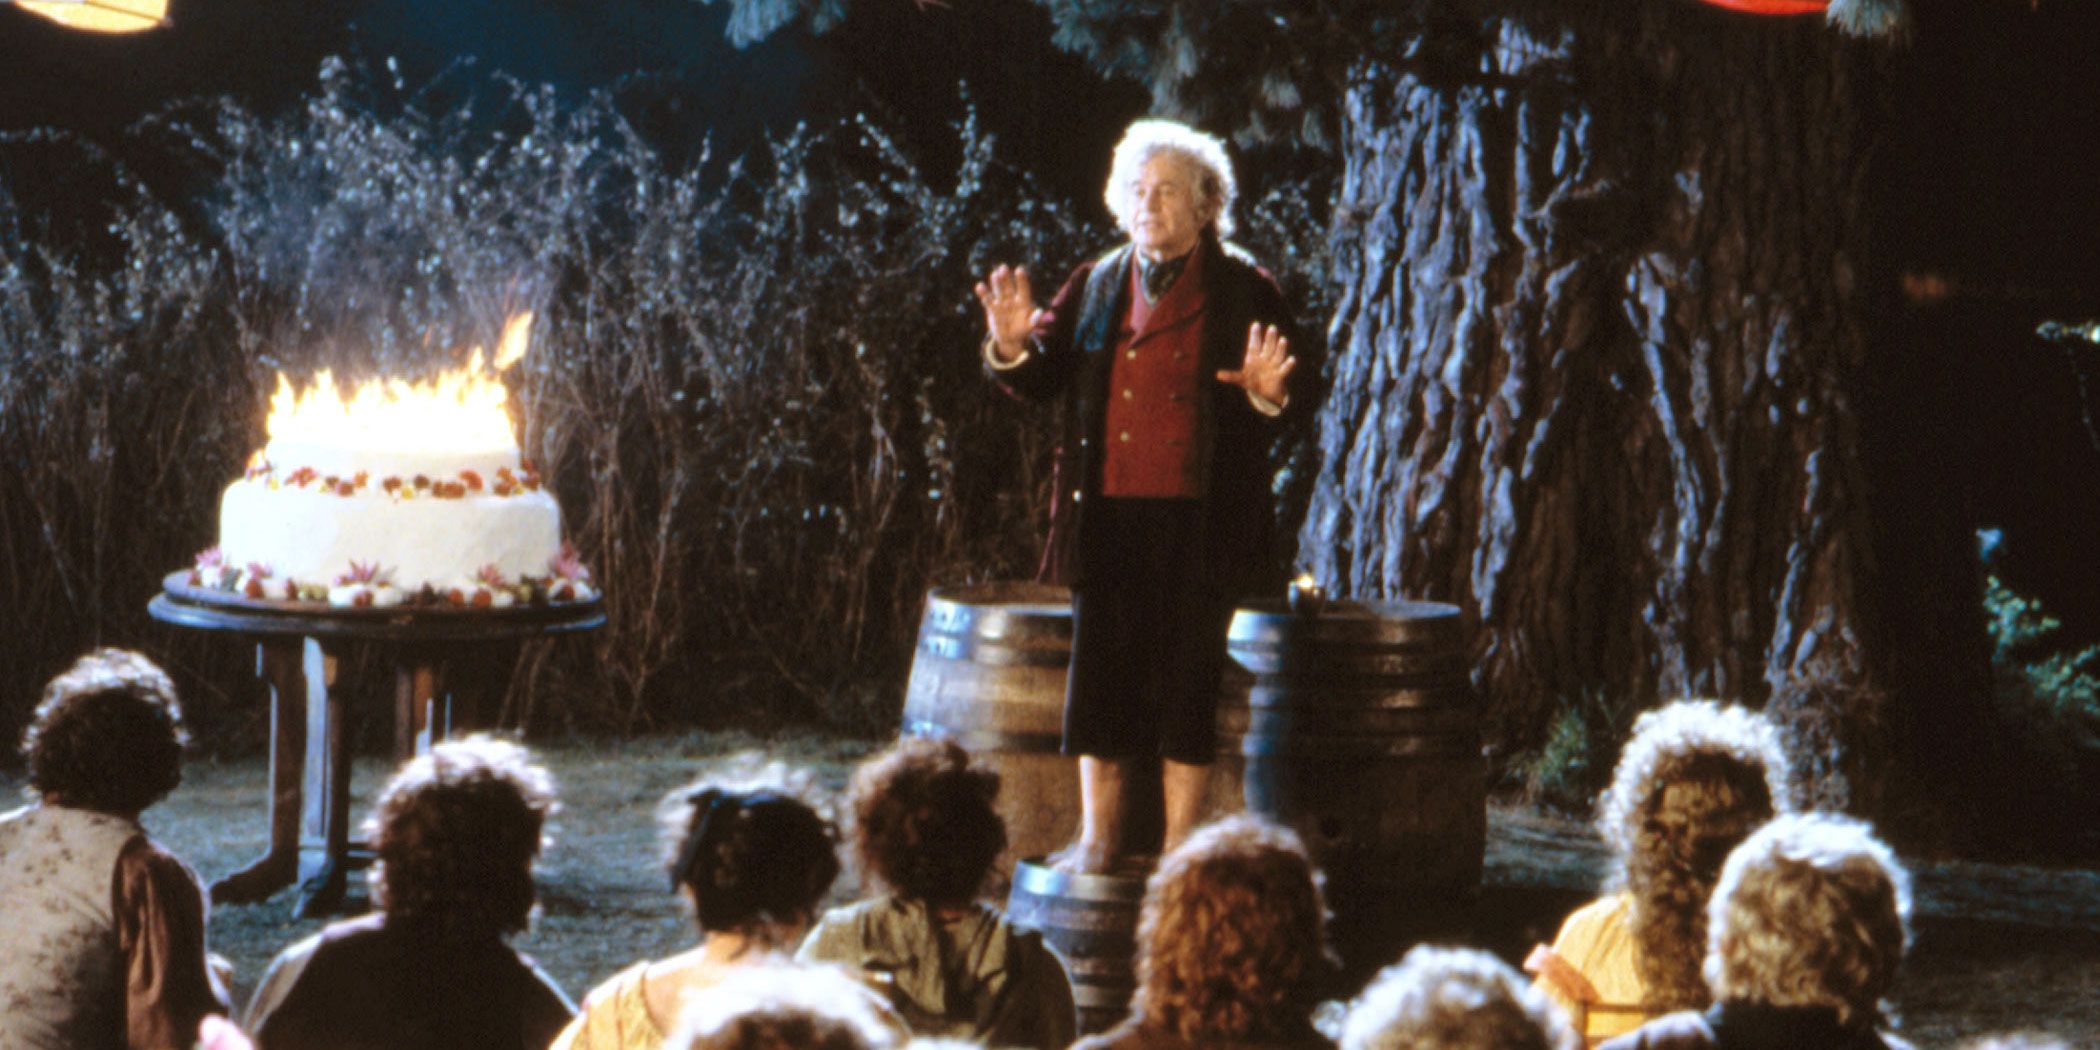 Bilbo Baggins giving a speech at his birthday party in The Lord of the Rings The Fellowship of the Ring